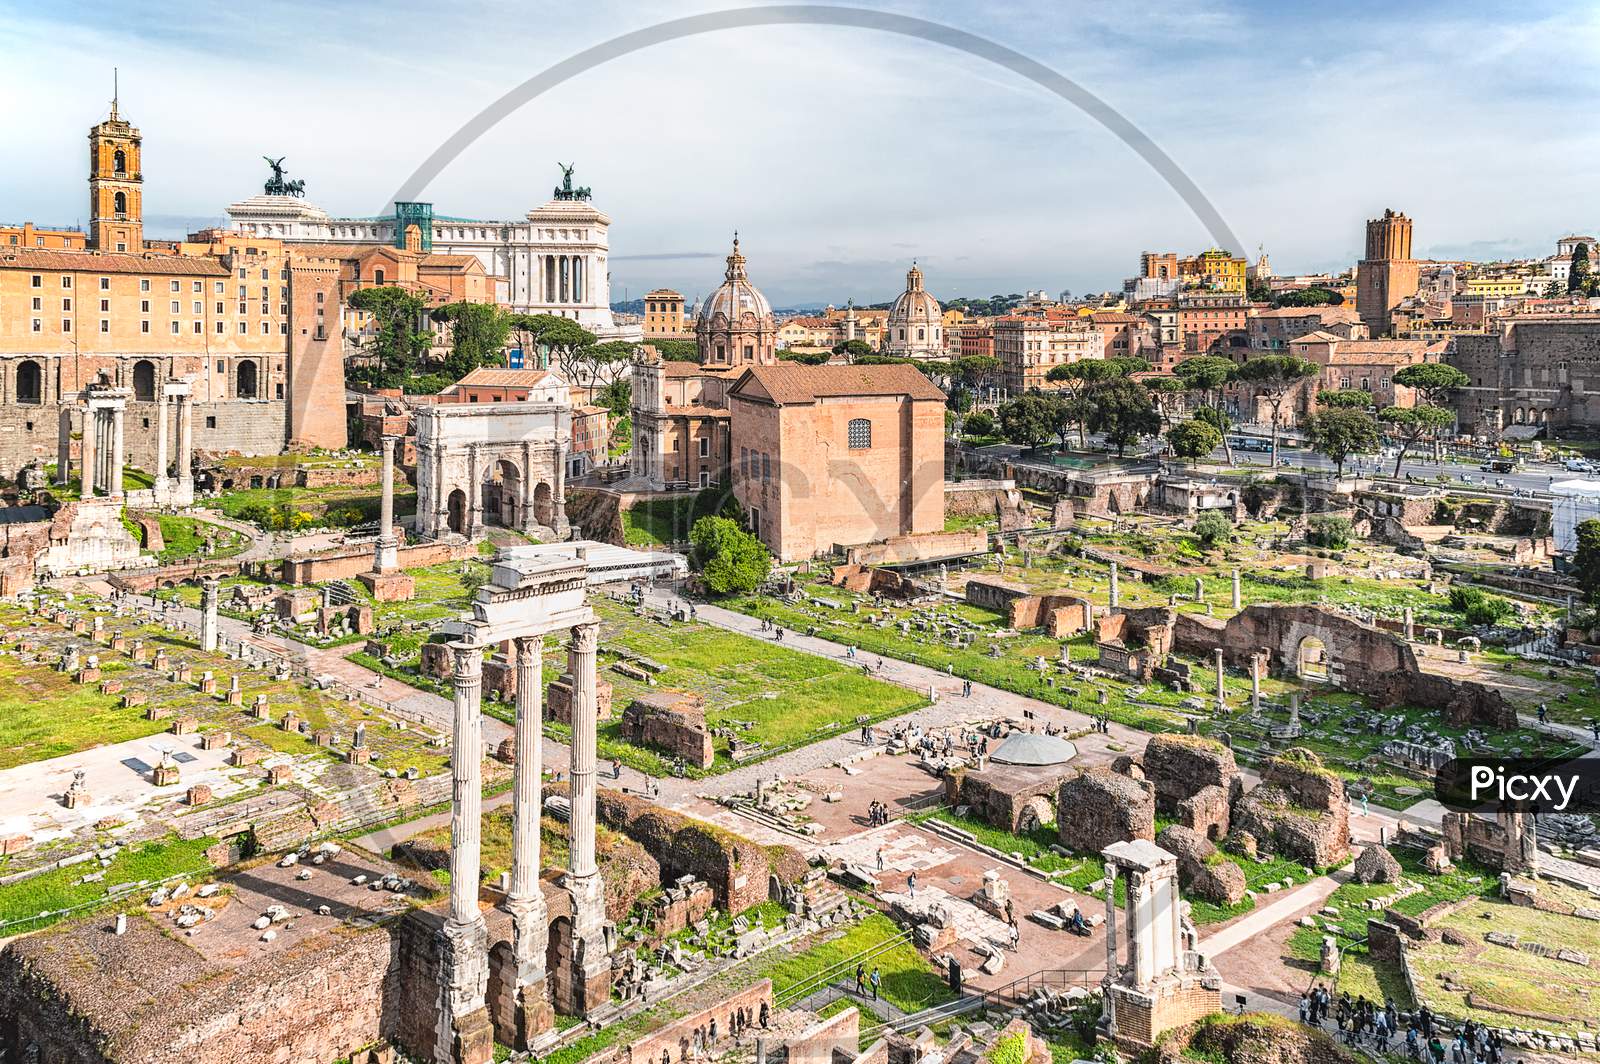 Ancient Monuments And Archaeological Remains Of The Roman Forum In Rome, Italy